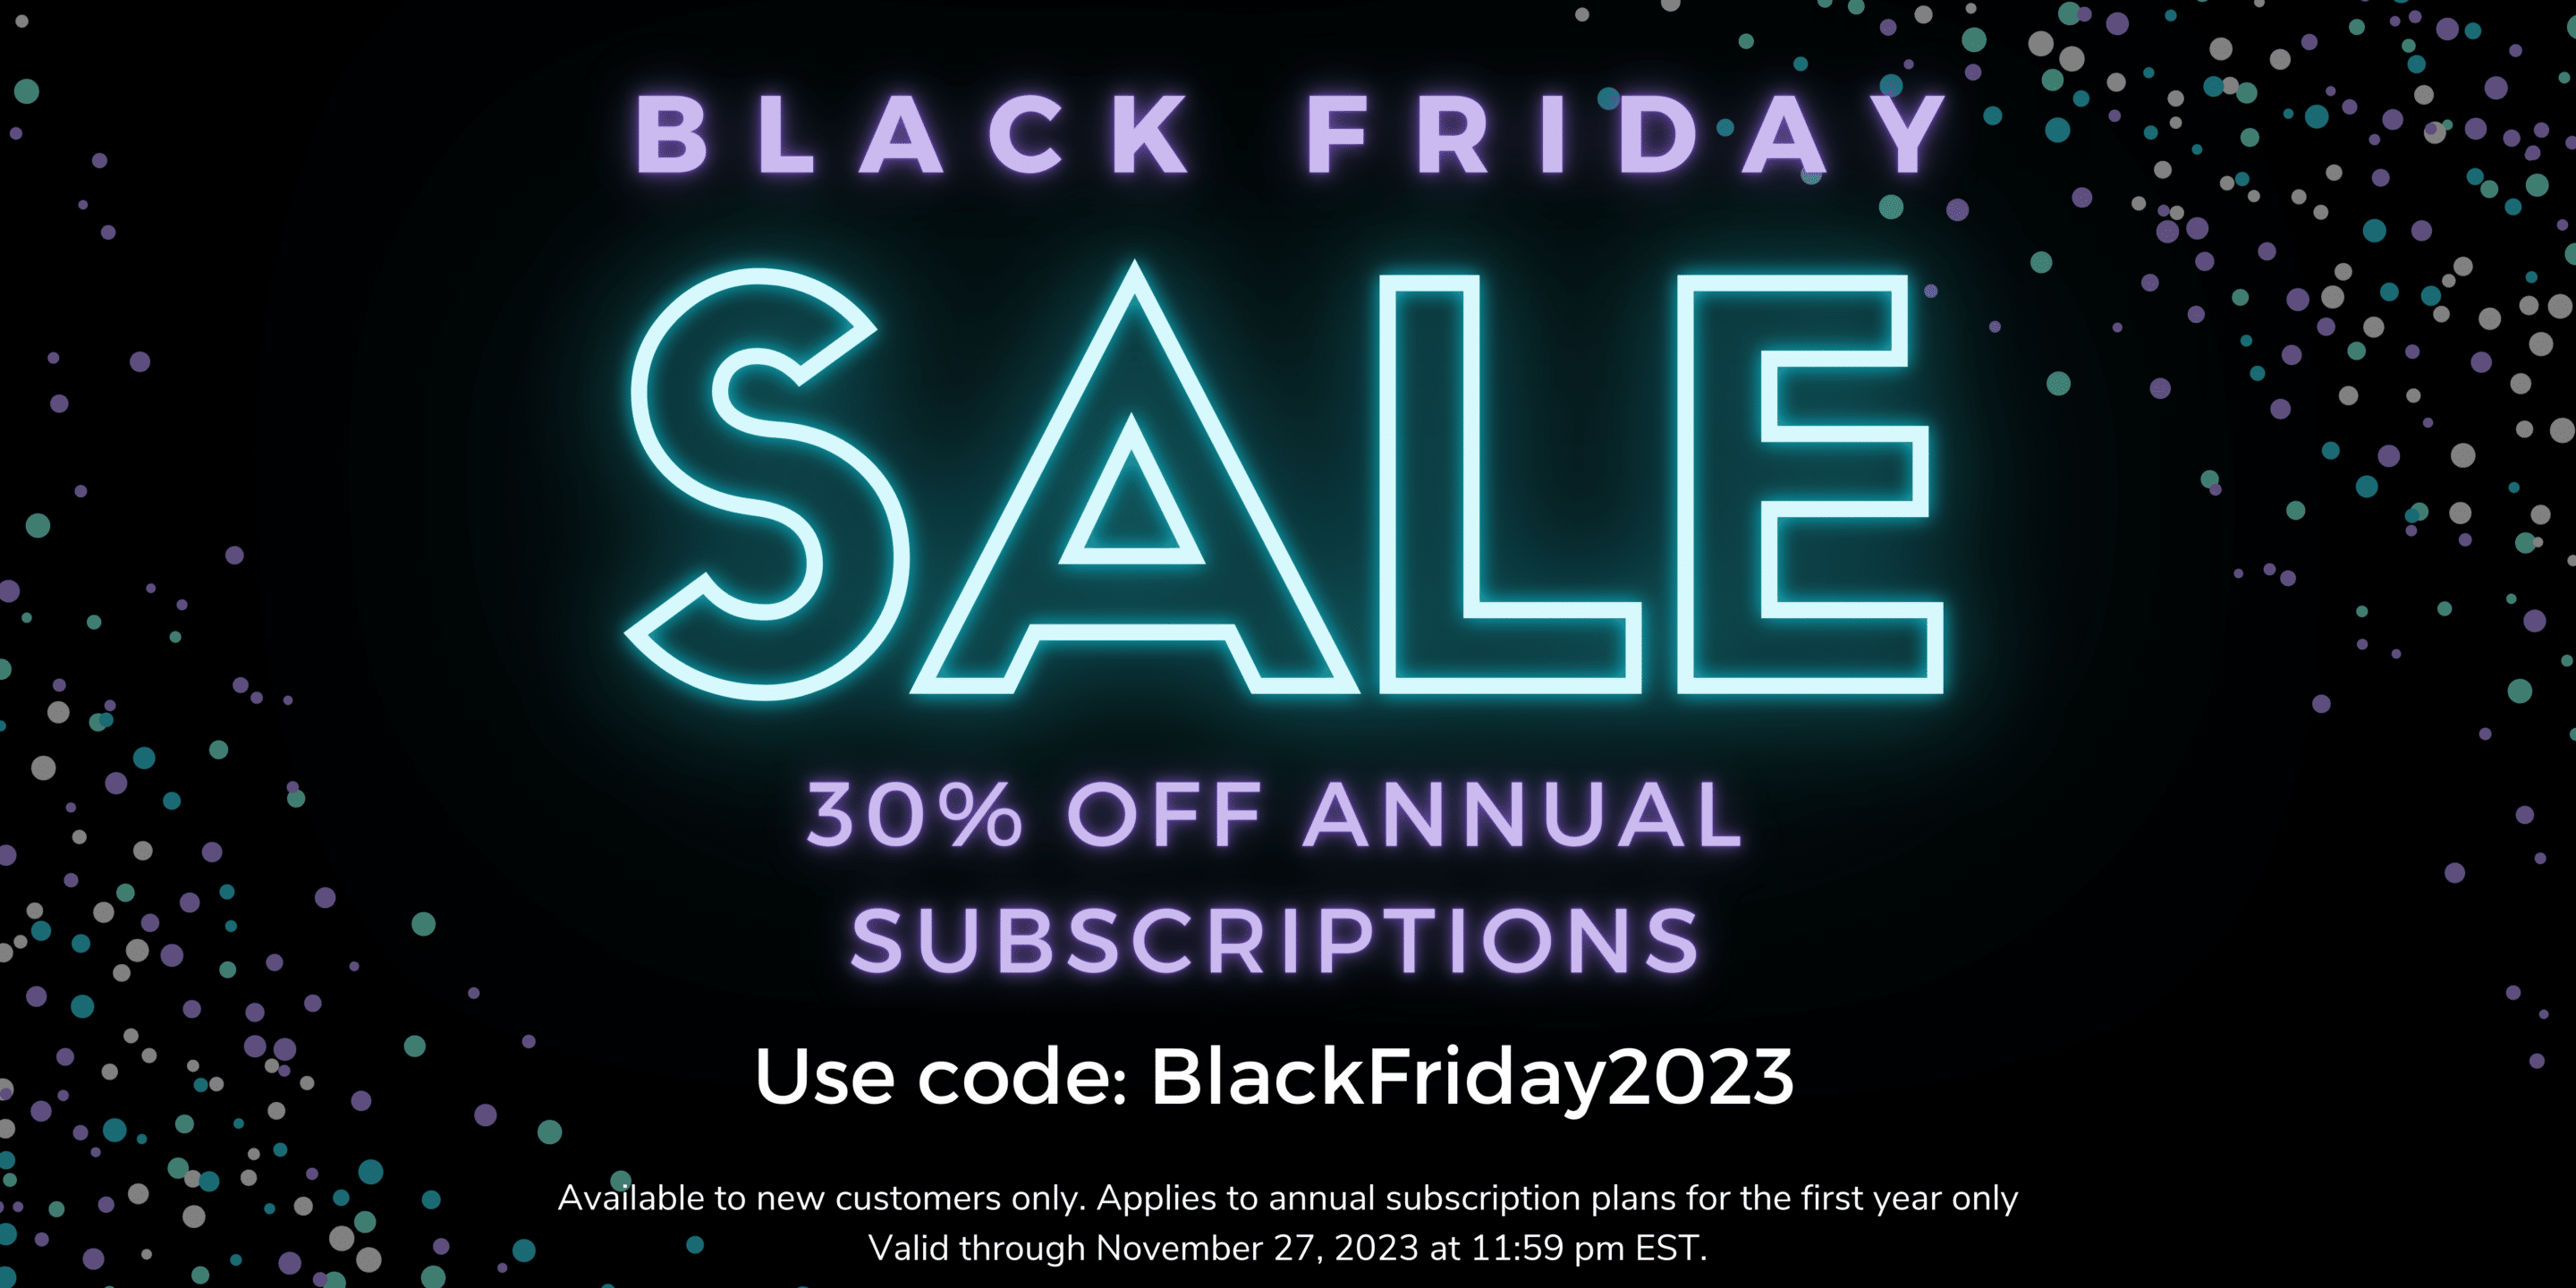 2022 Black Friday Sale from Iris Works